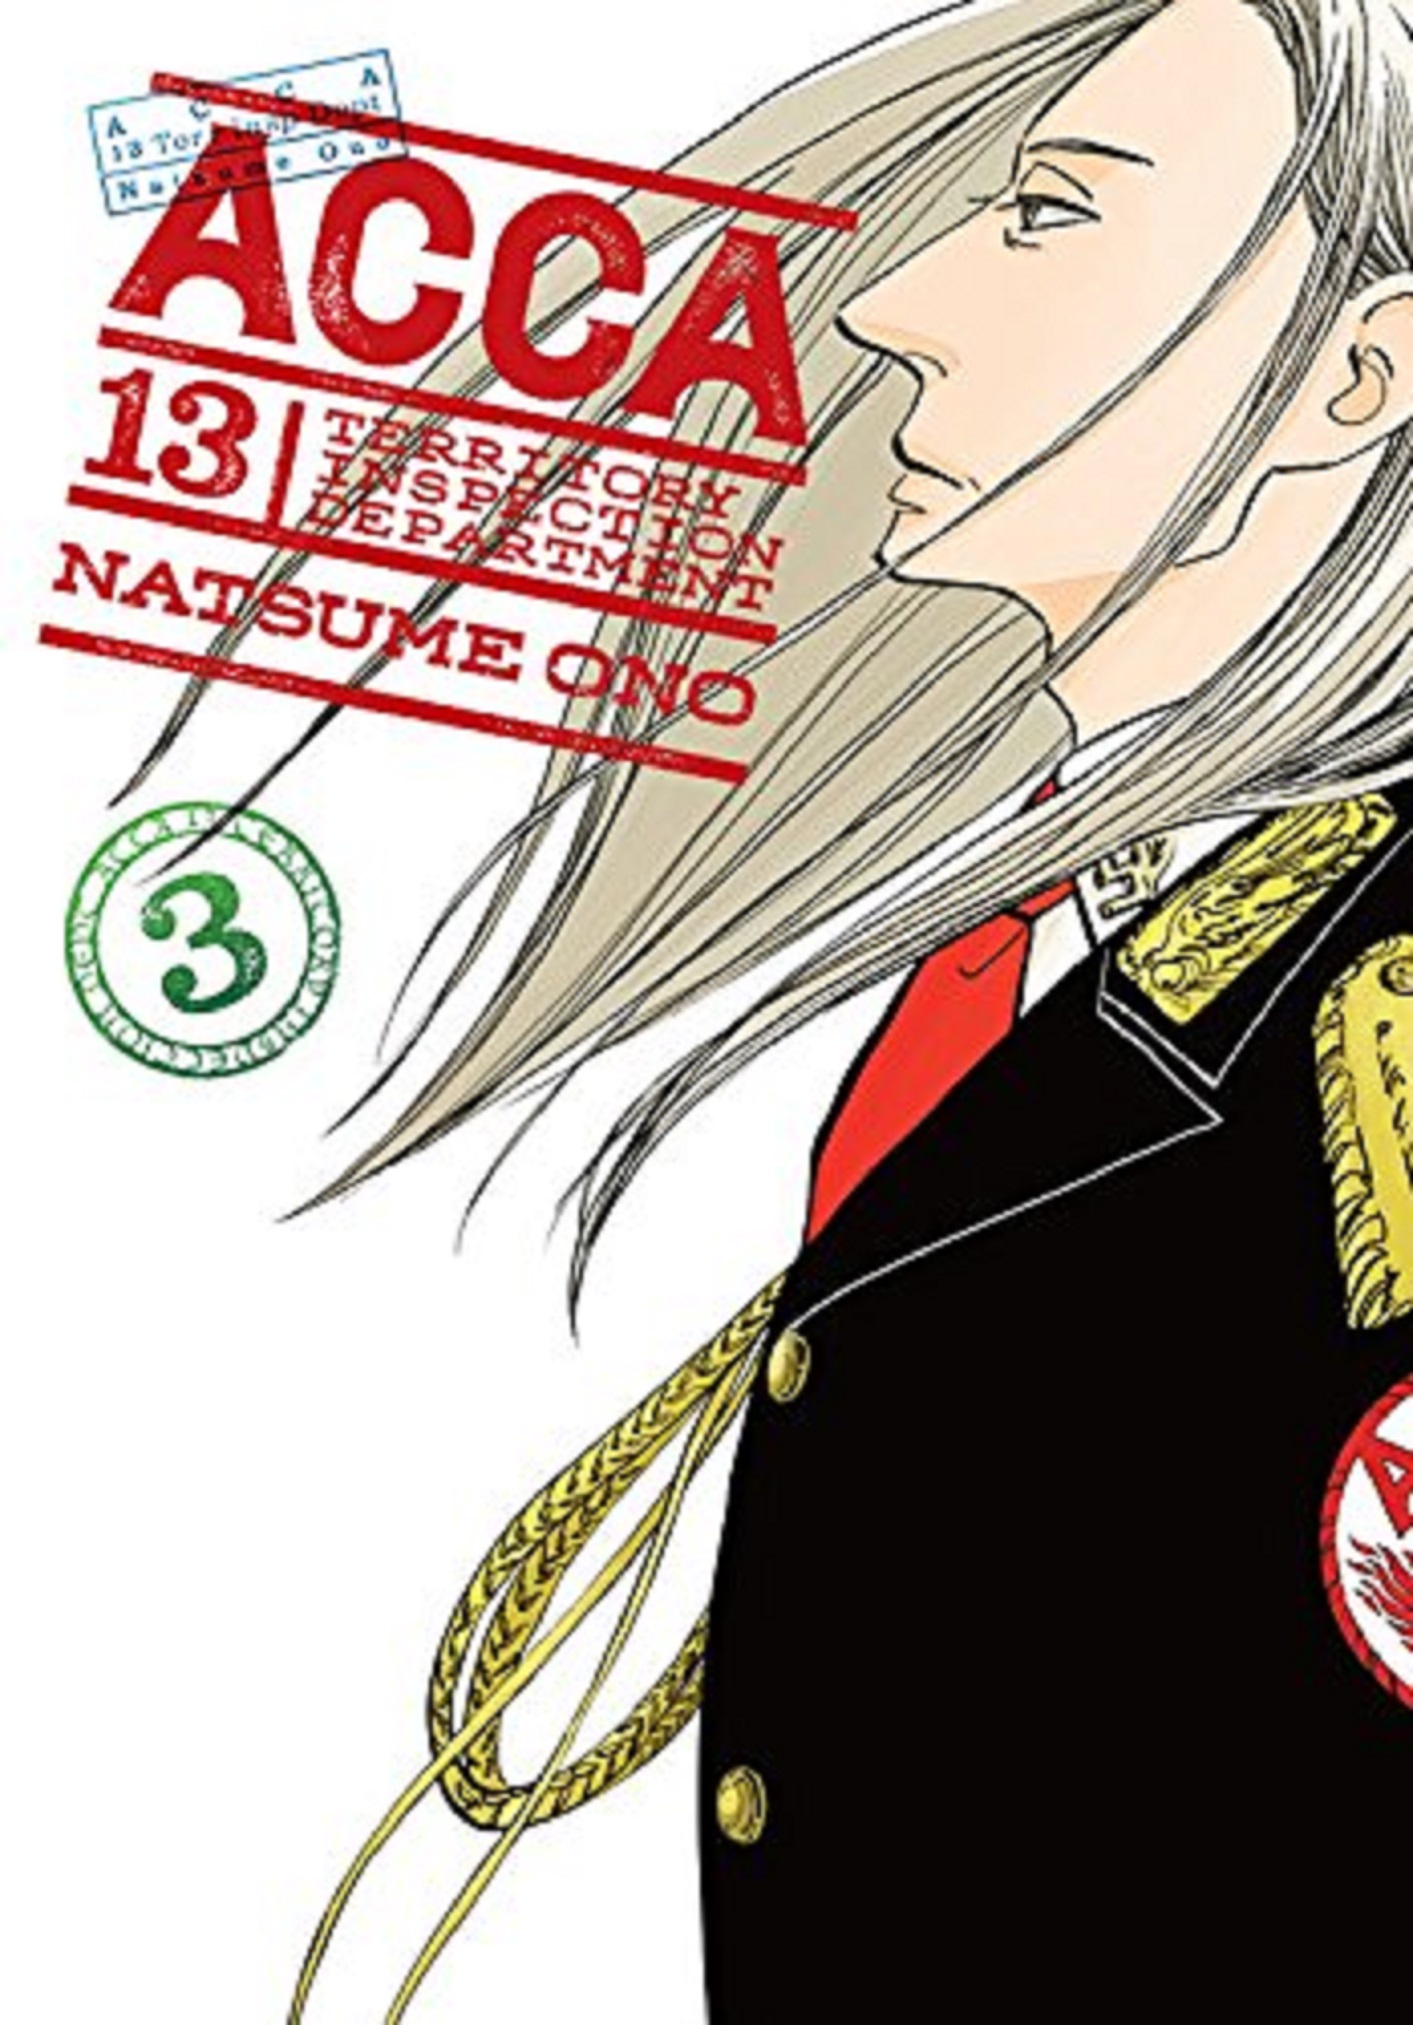 ACCA 13-Territory Inspection Department - Volume 3